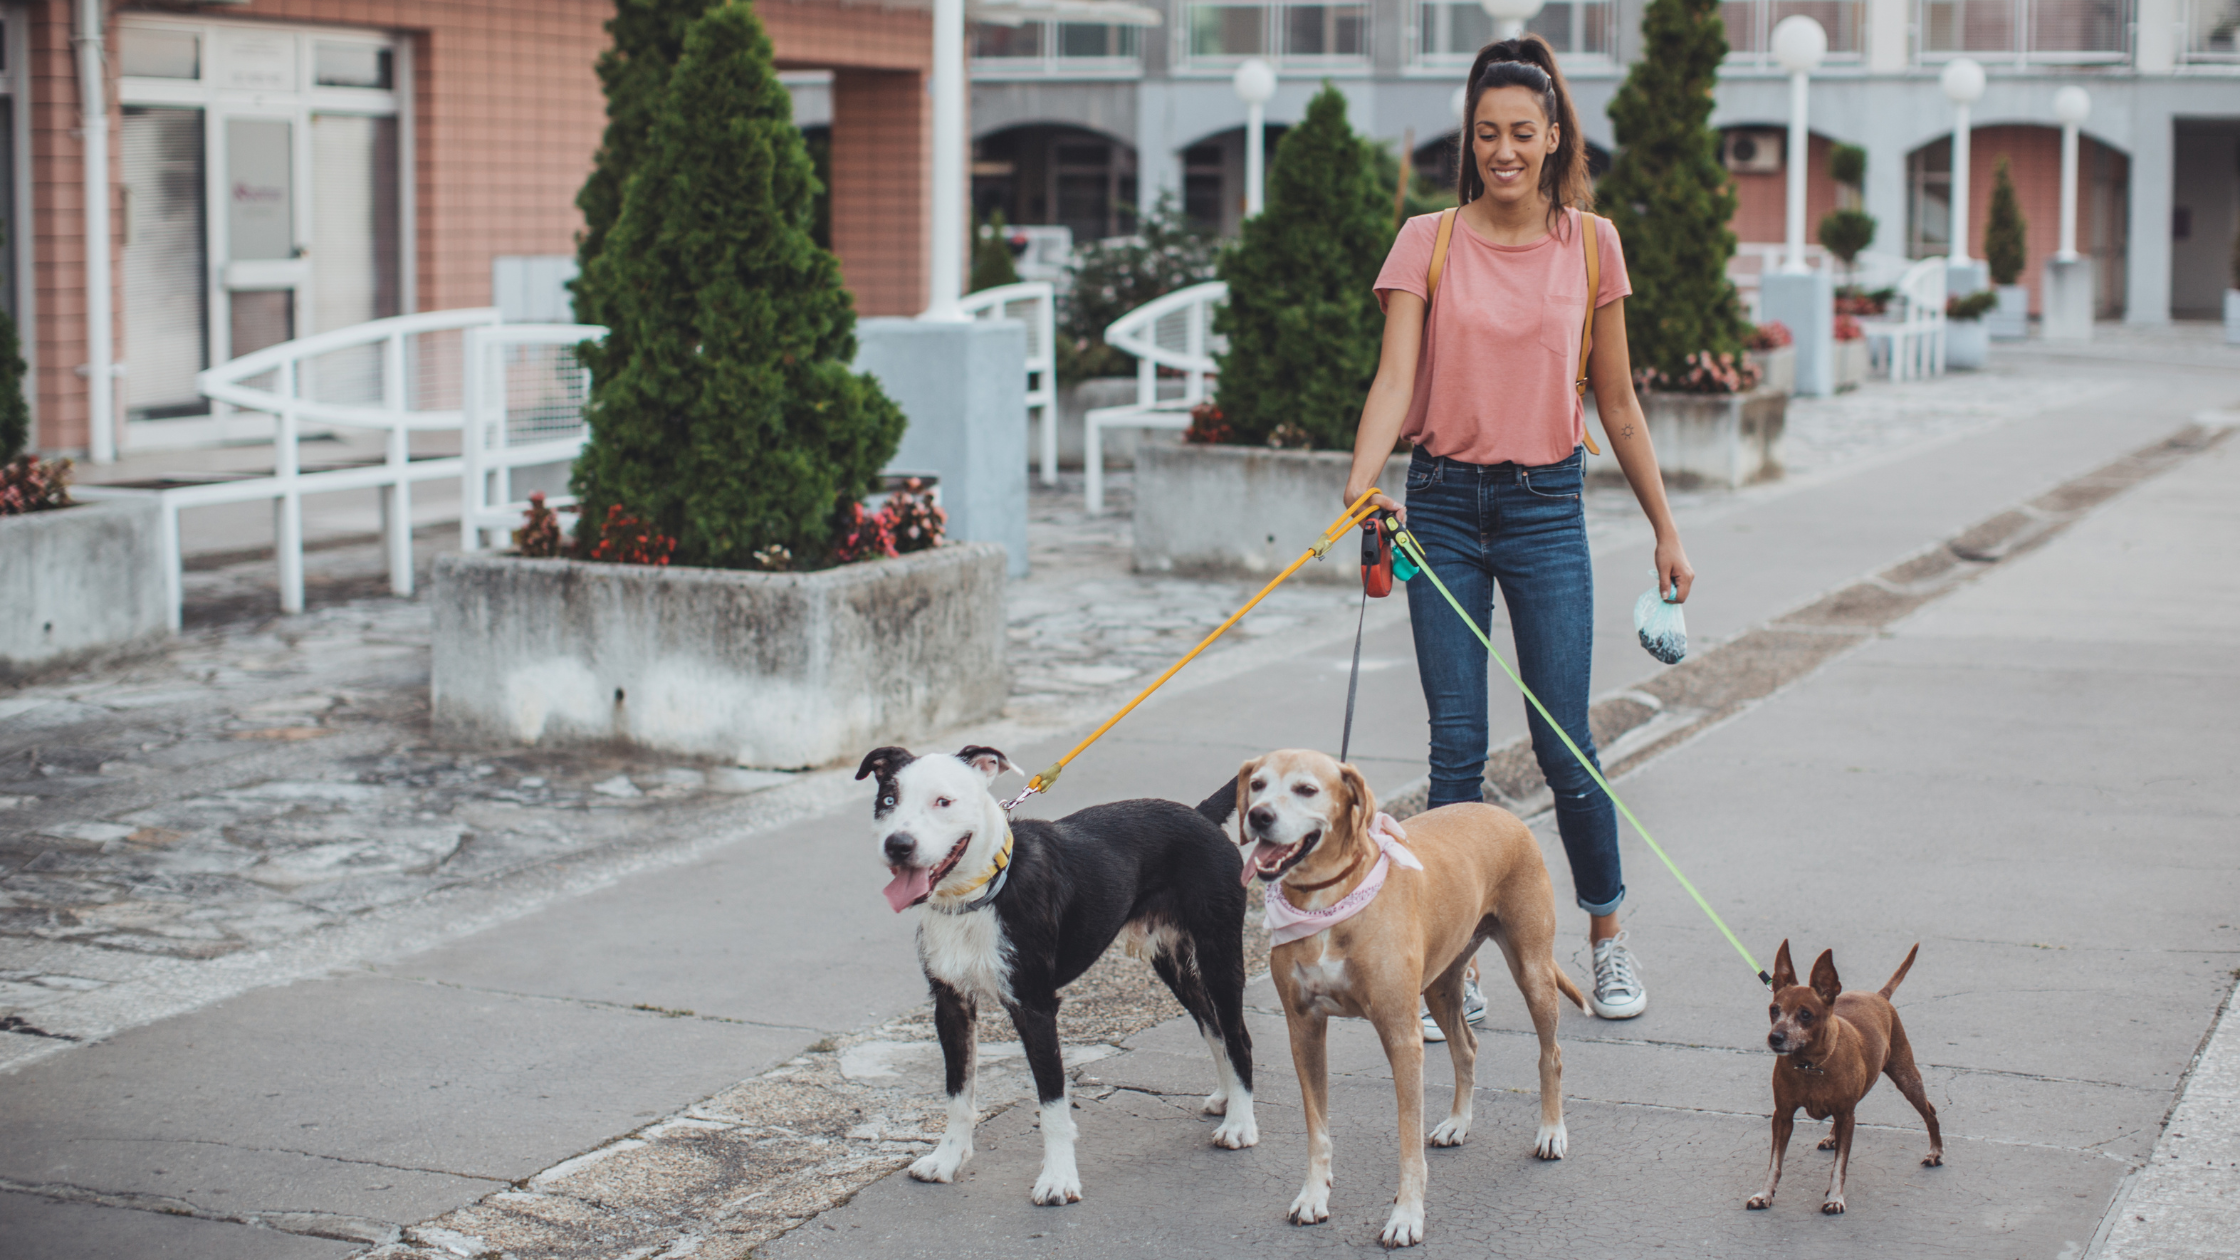 Dog walker and pet sitter small business idea at home